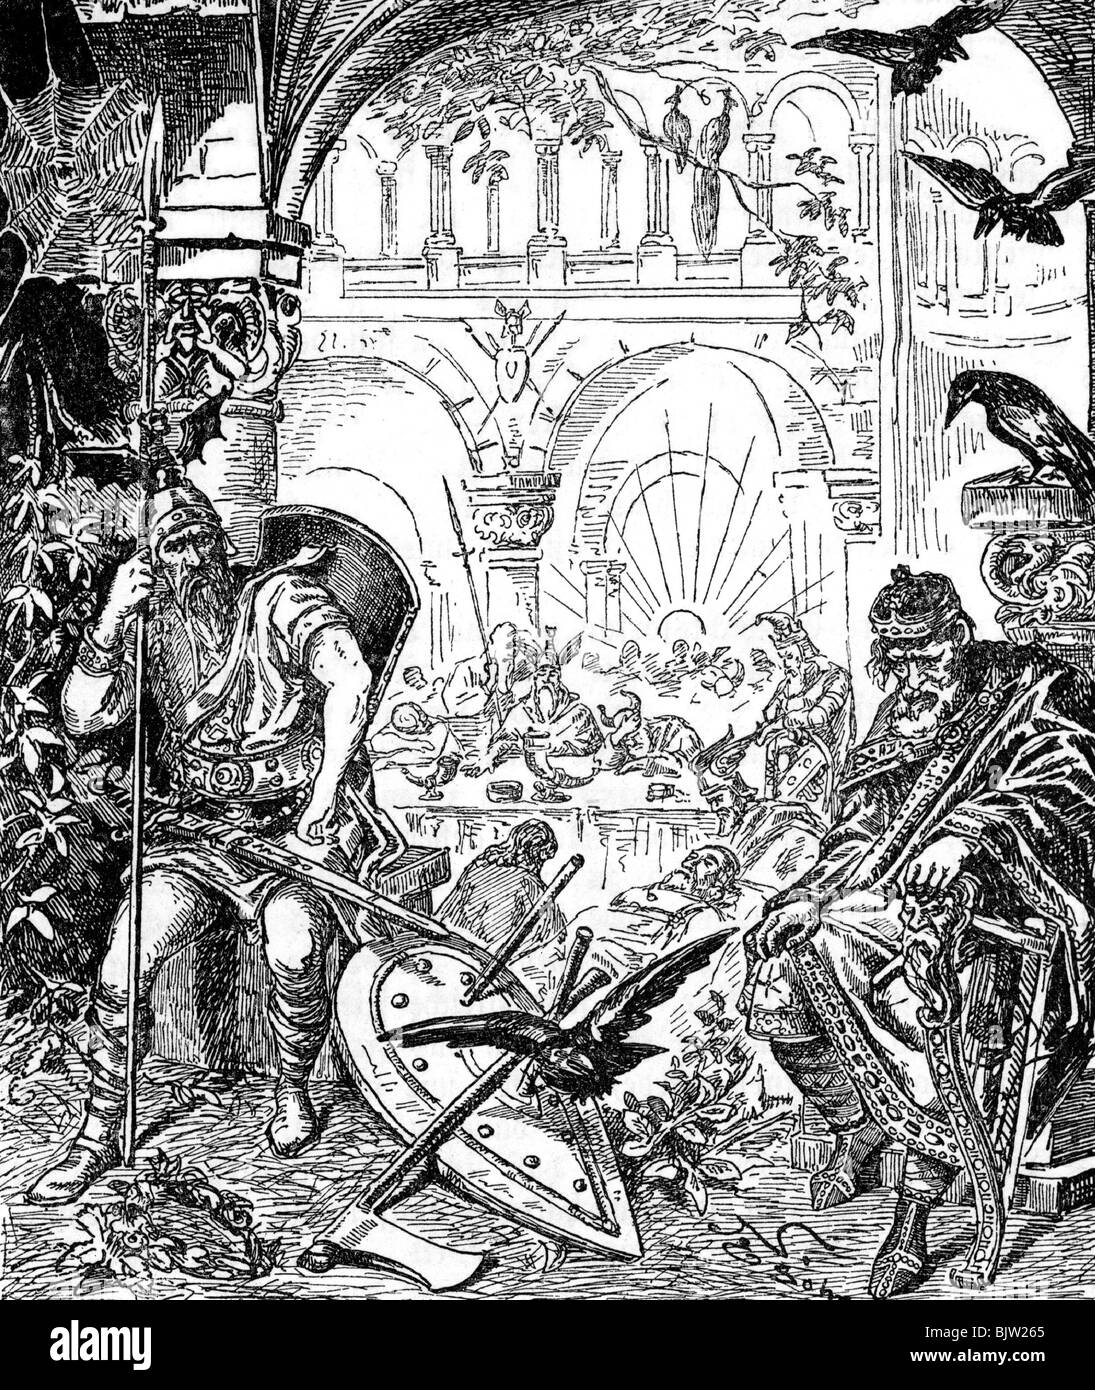 literature, legends / saga, 'The Nibelungen', Hagen and Wolter,  drawing by Boehm, 19th century, Stock Photo